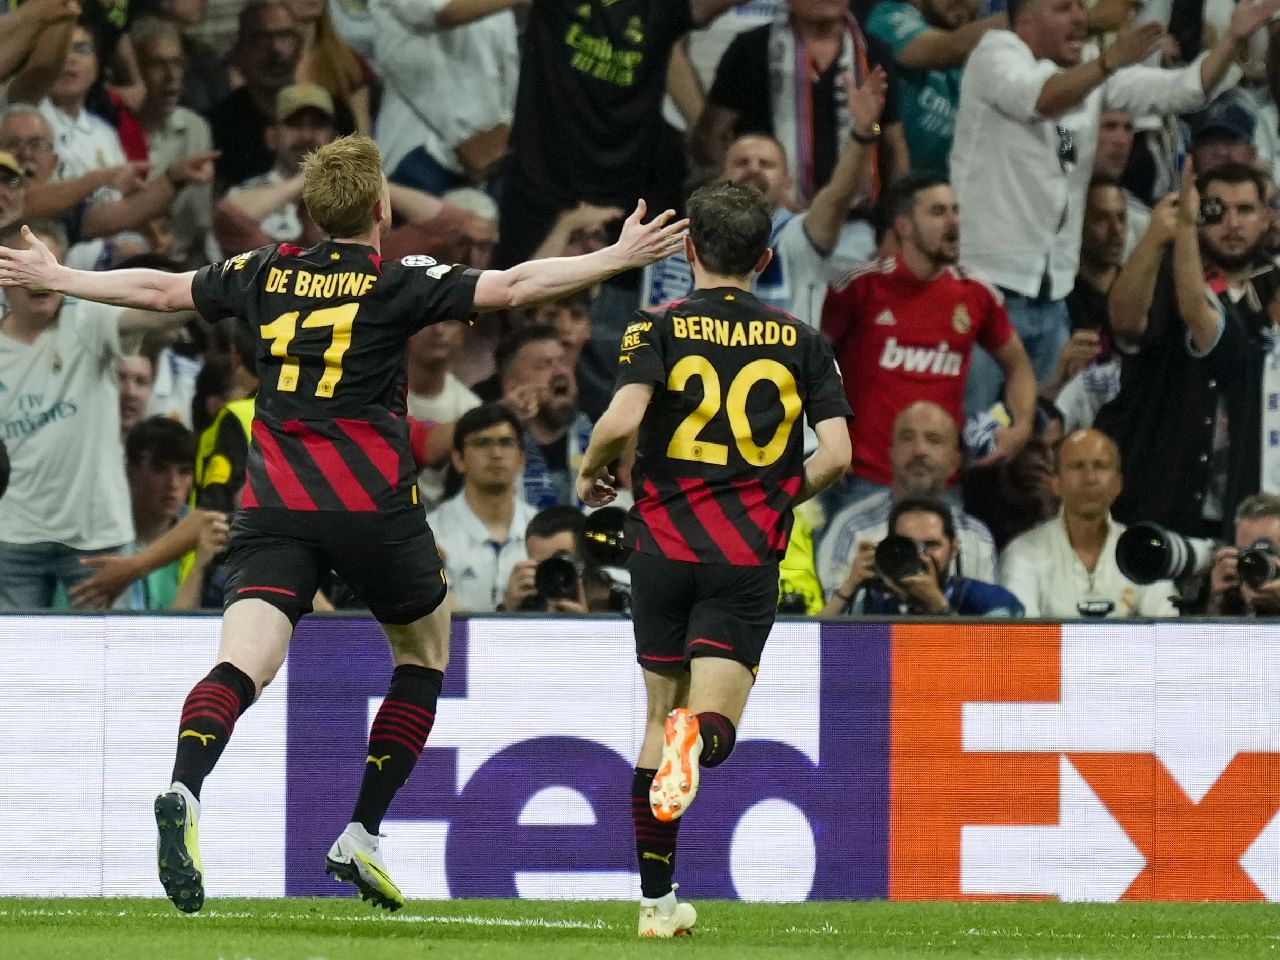 Champions League: De Bruyne stunner leaves Man City and Real Madrid level